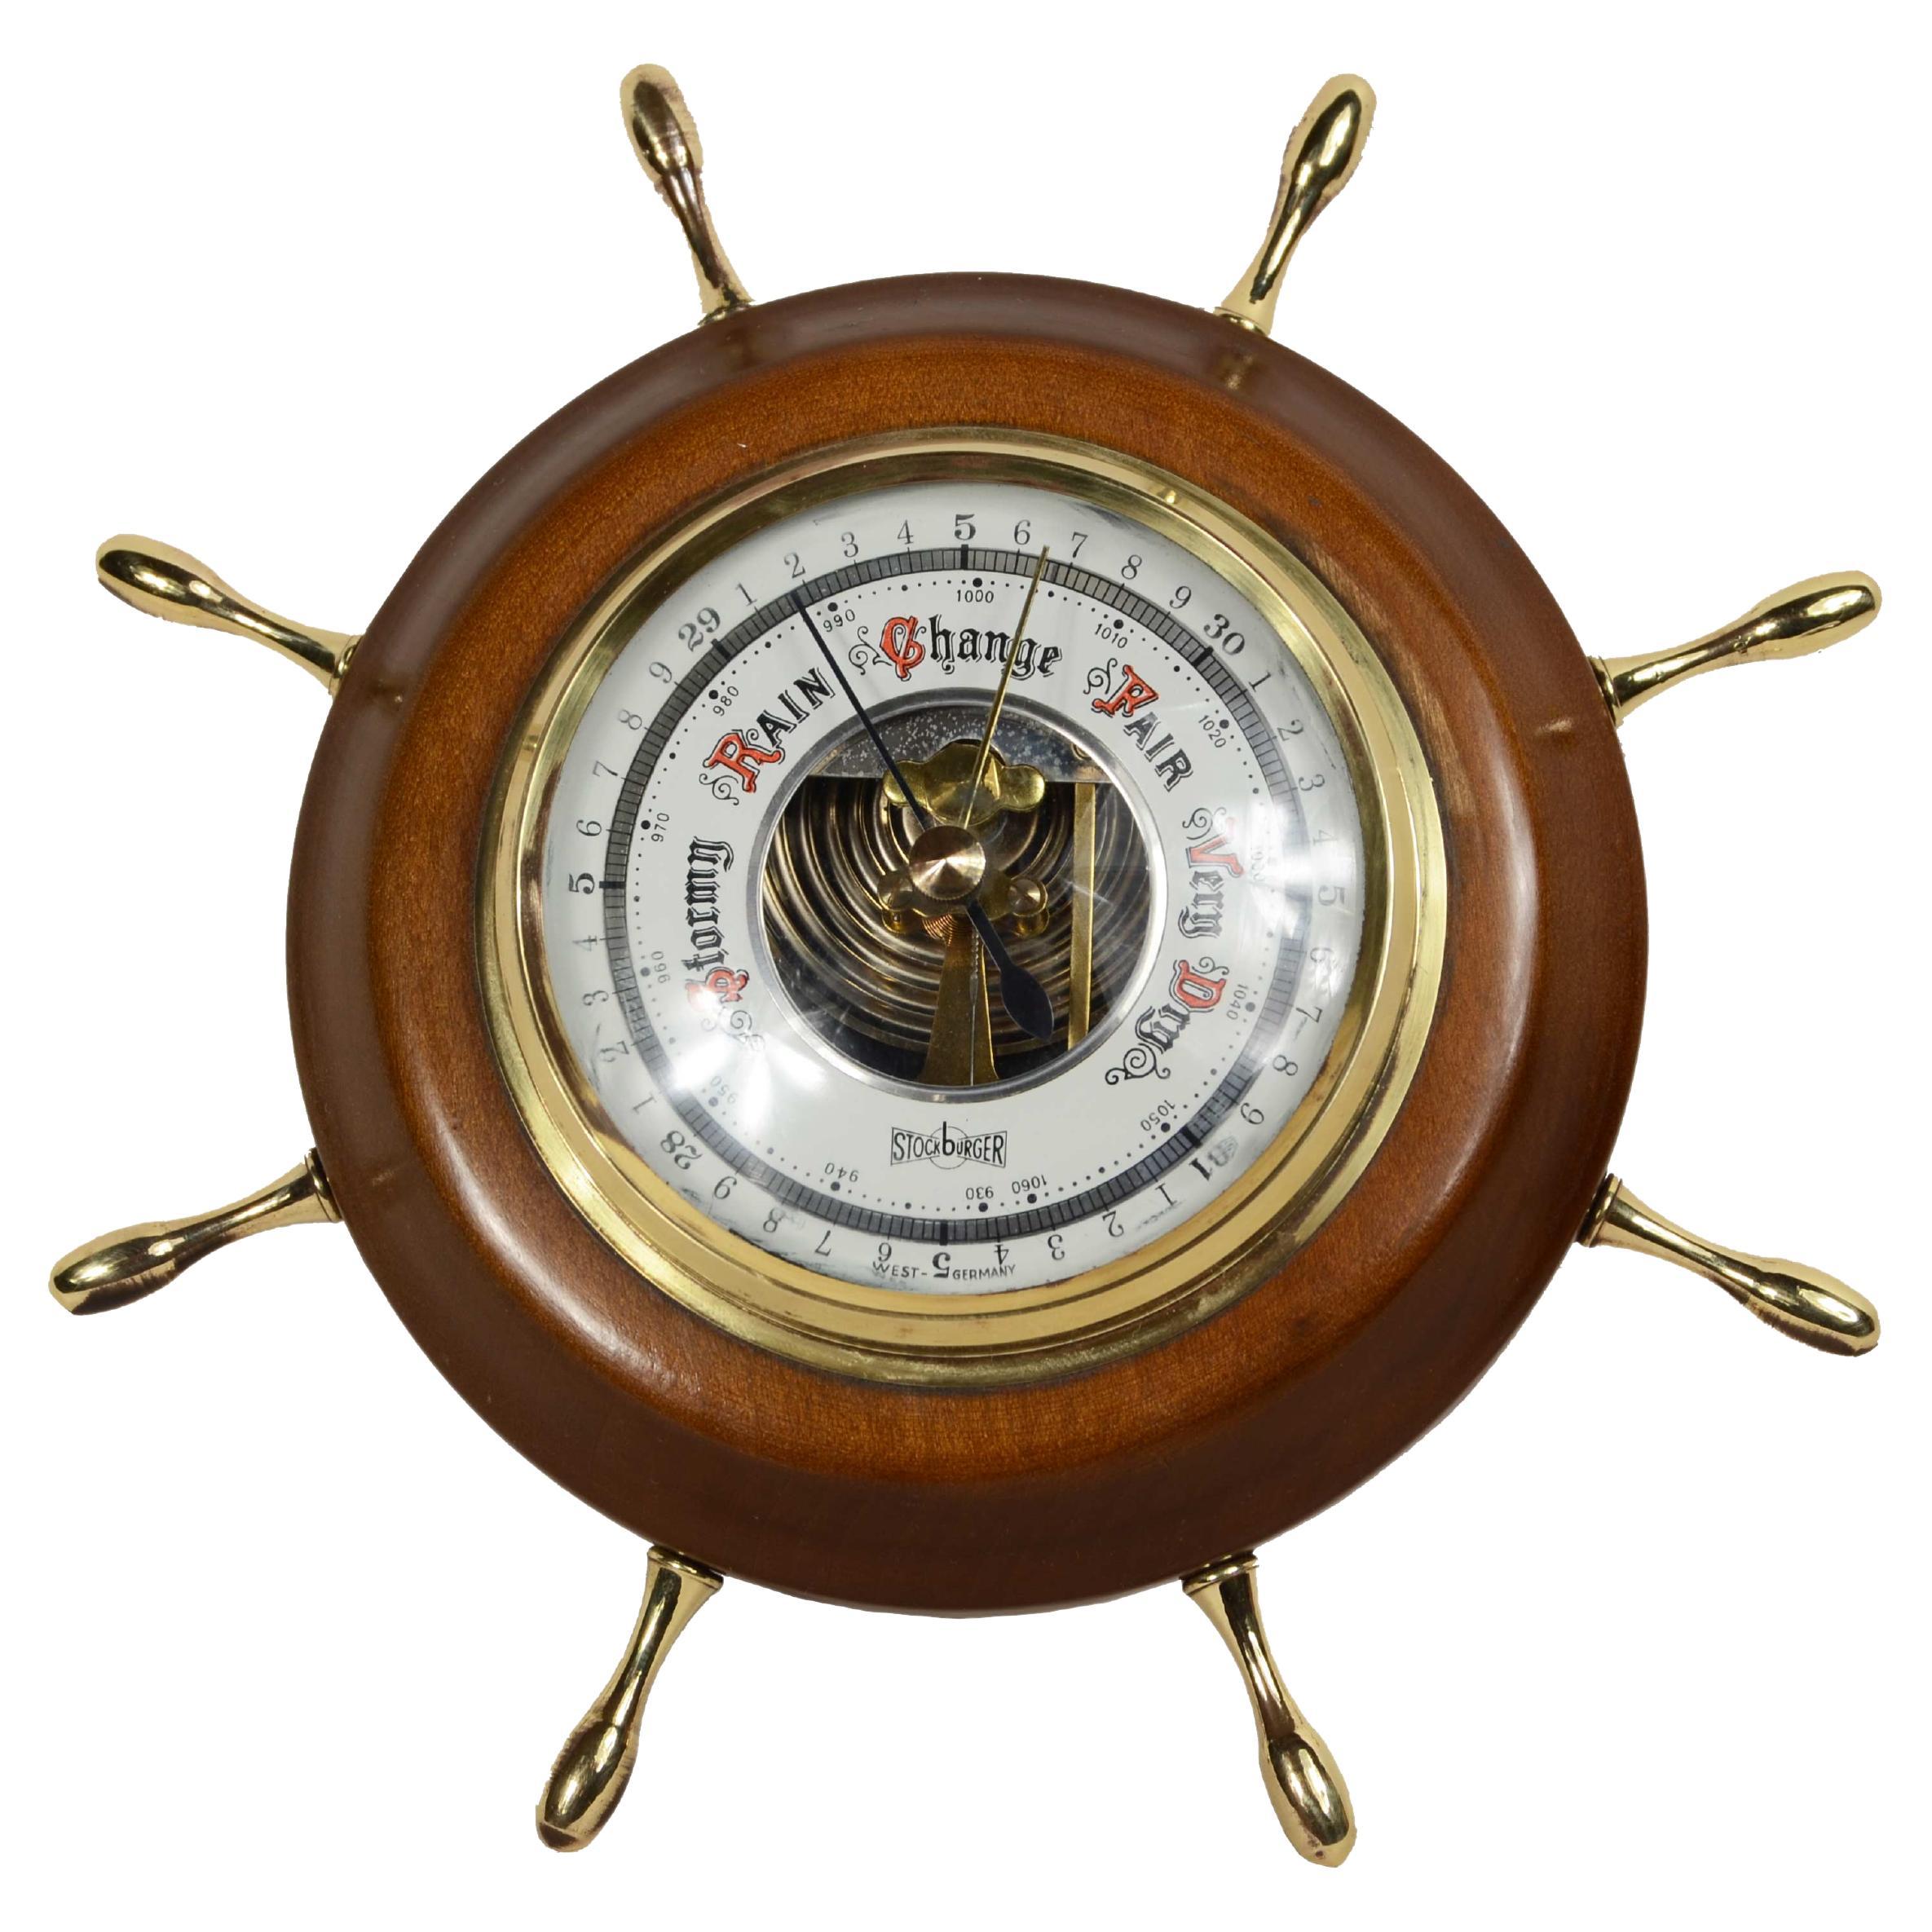 Rudder-shaped aneroid barometer with 8 brass ankles from the 1950s